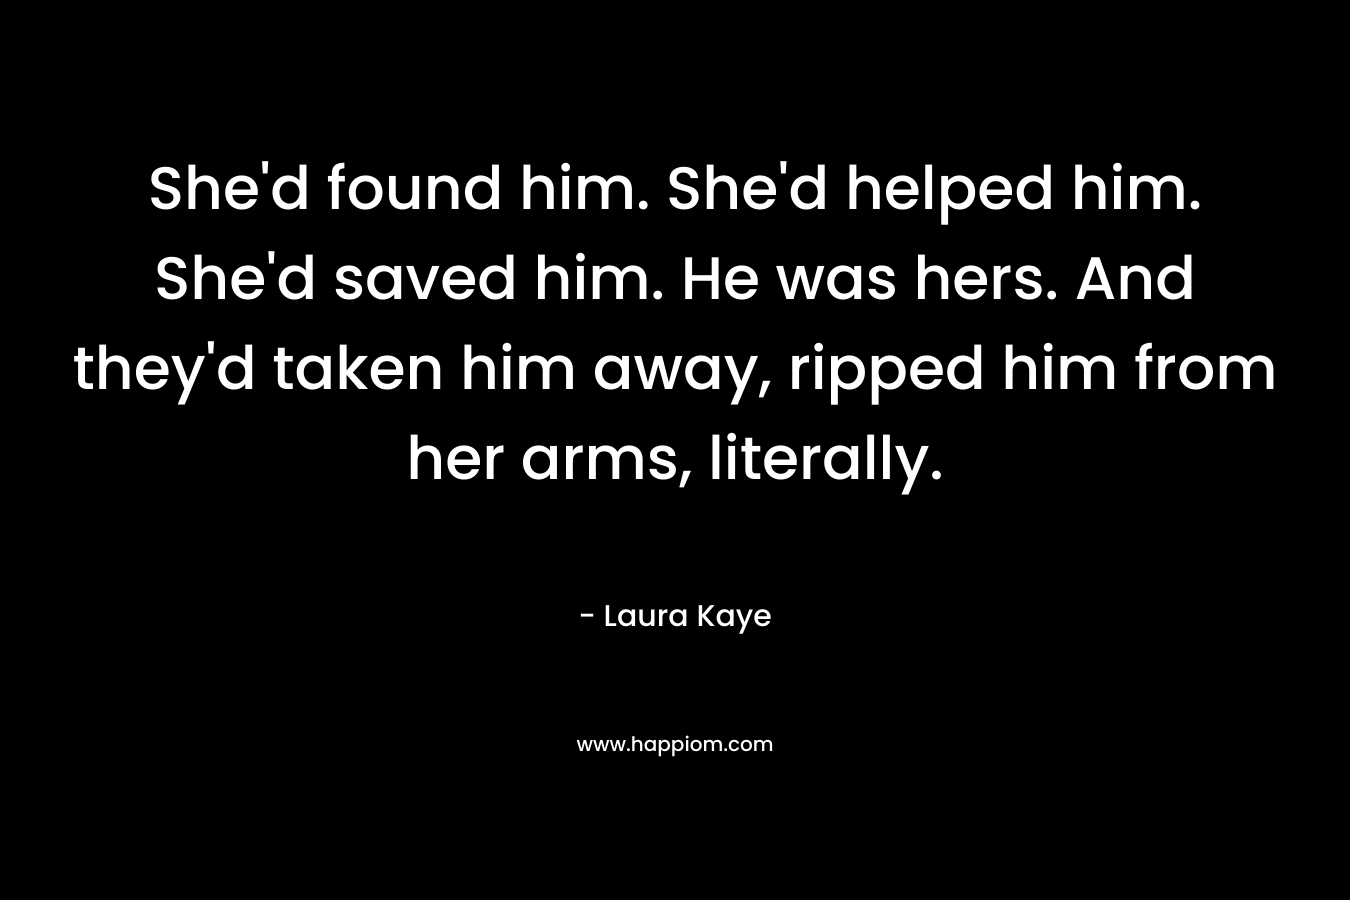 She’d found him. She’d helped him. She’d saved him. He was hers. And they’d taken him away, ripped him from her arms, literally. – Laura Kaye